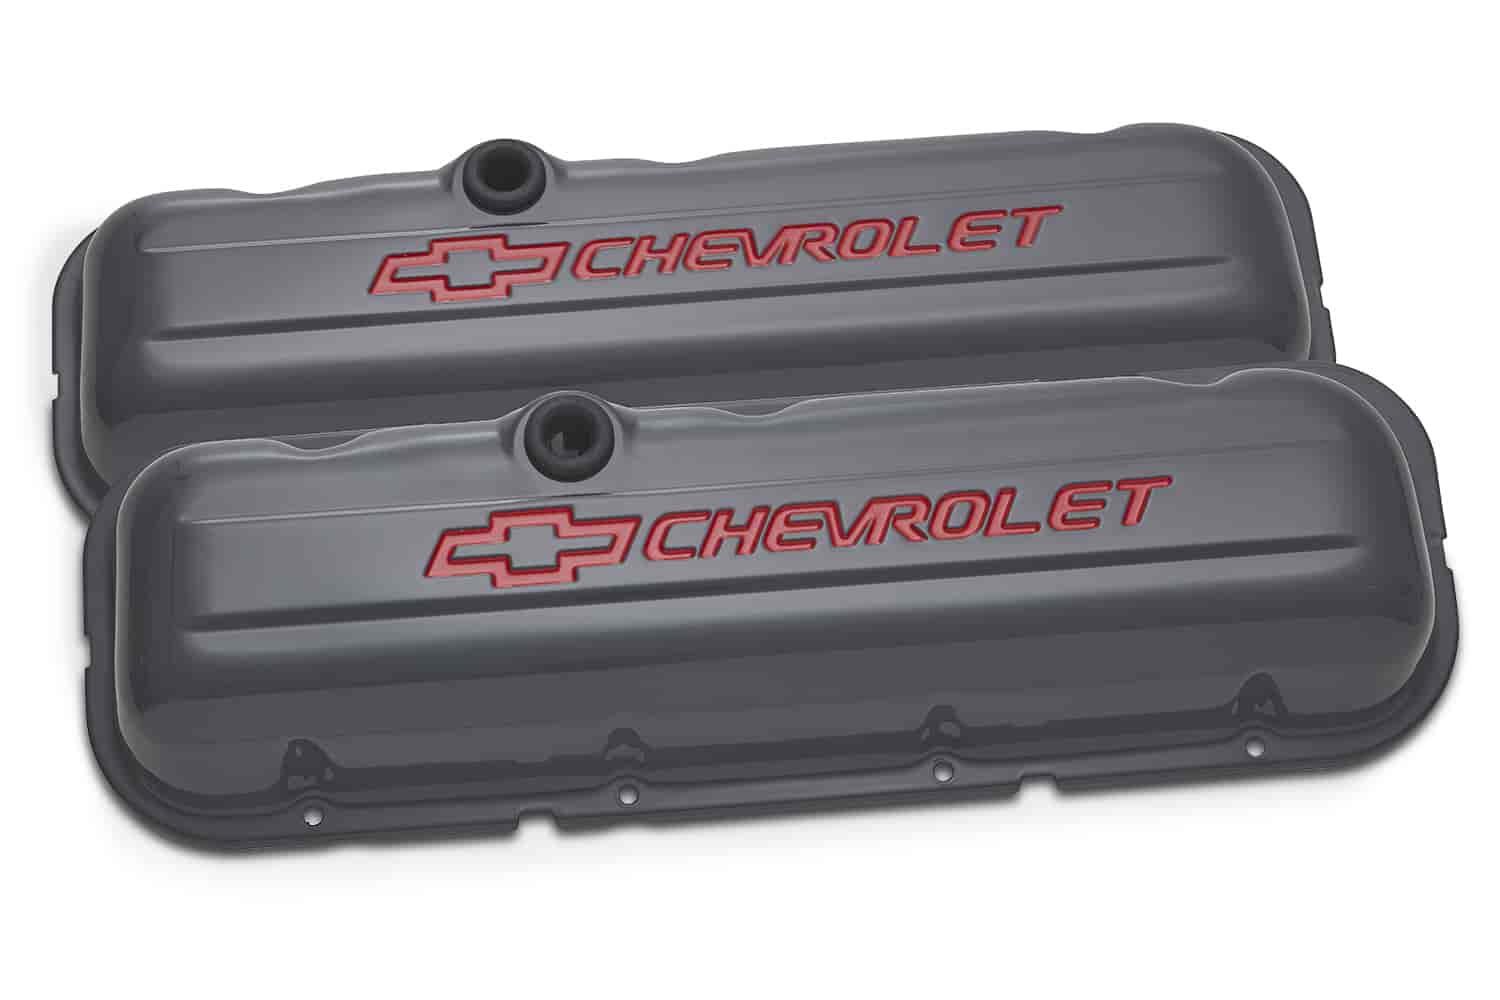 Stamped Steel Short Valve Covers for 1965-1996 Big Block Chevy with Chevrolet/Bowtie Recessed Emblem in Shark Gray Finish